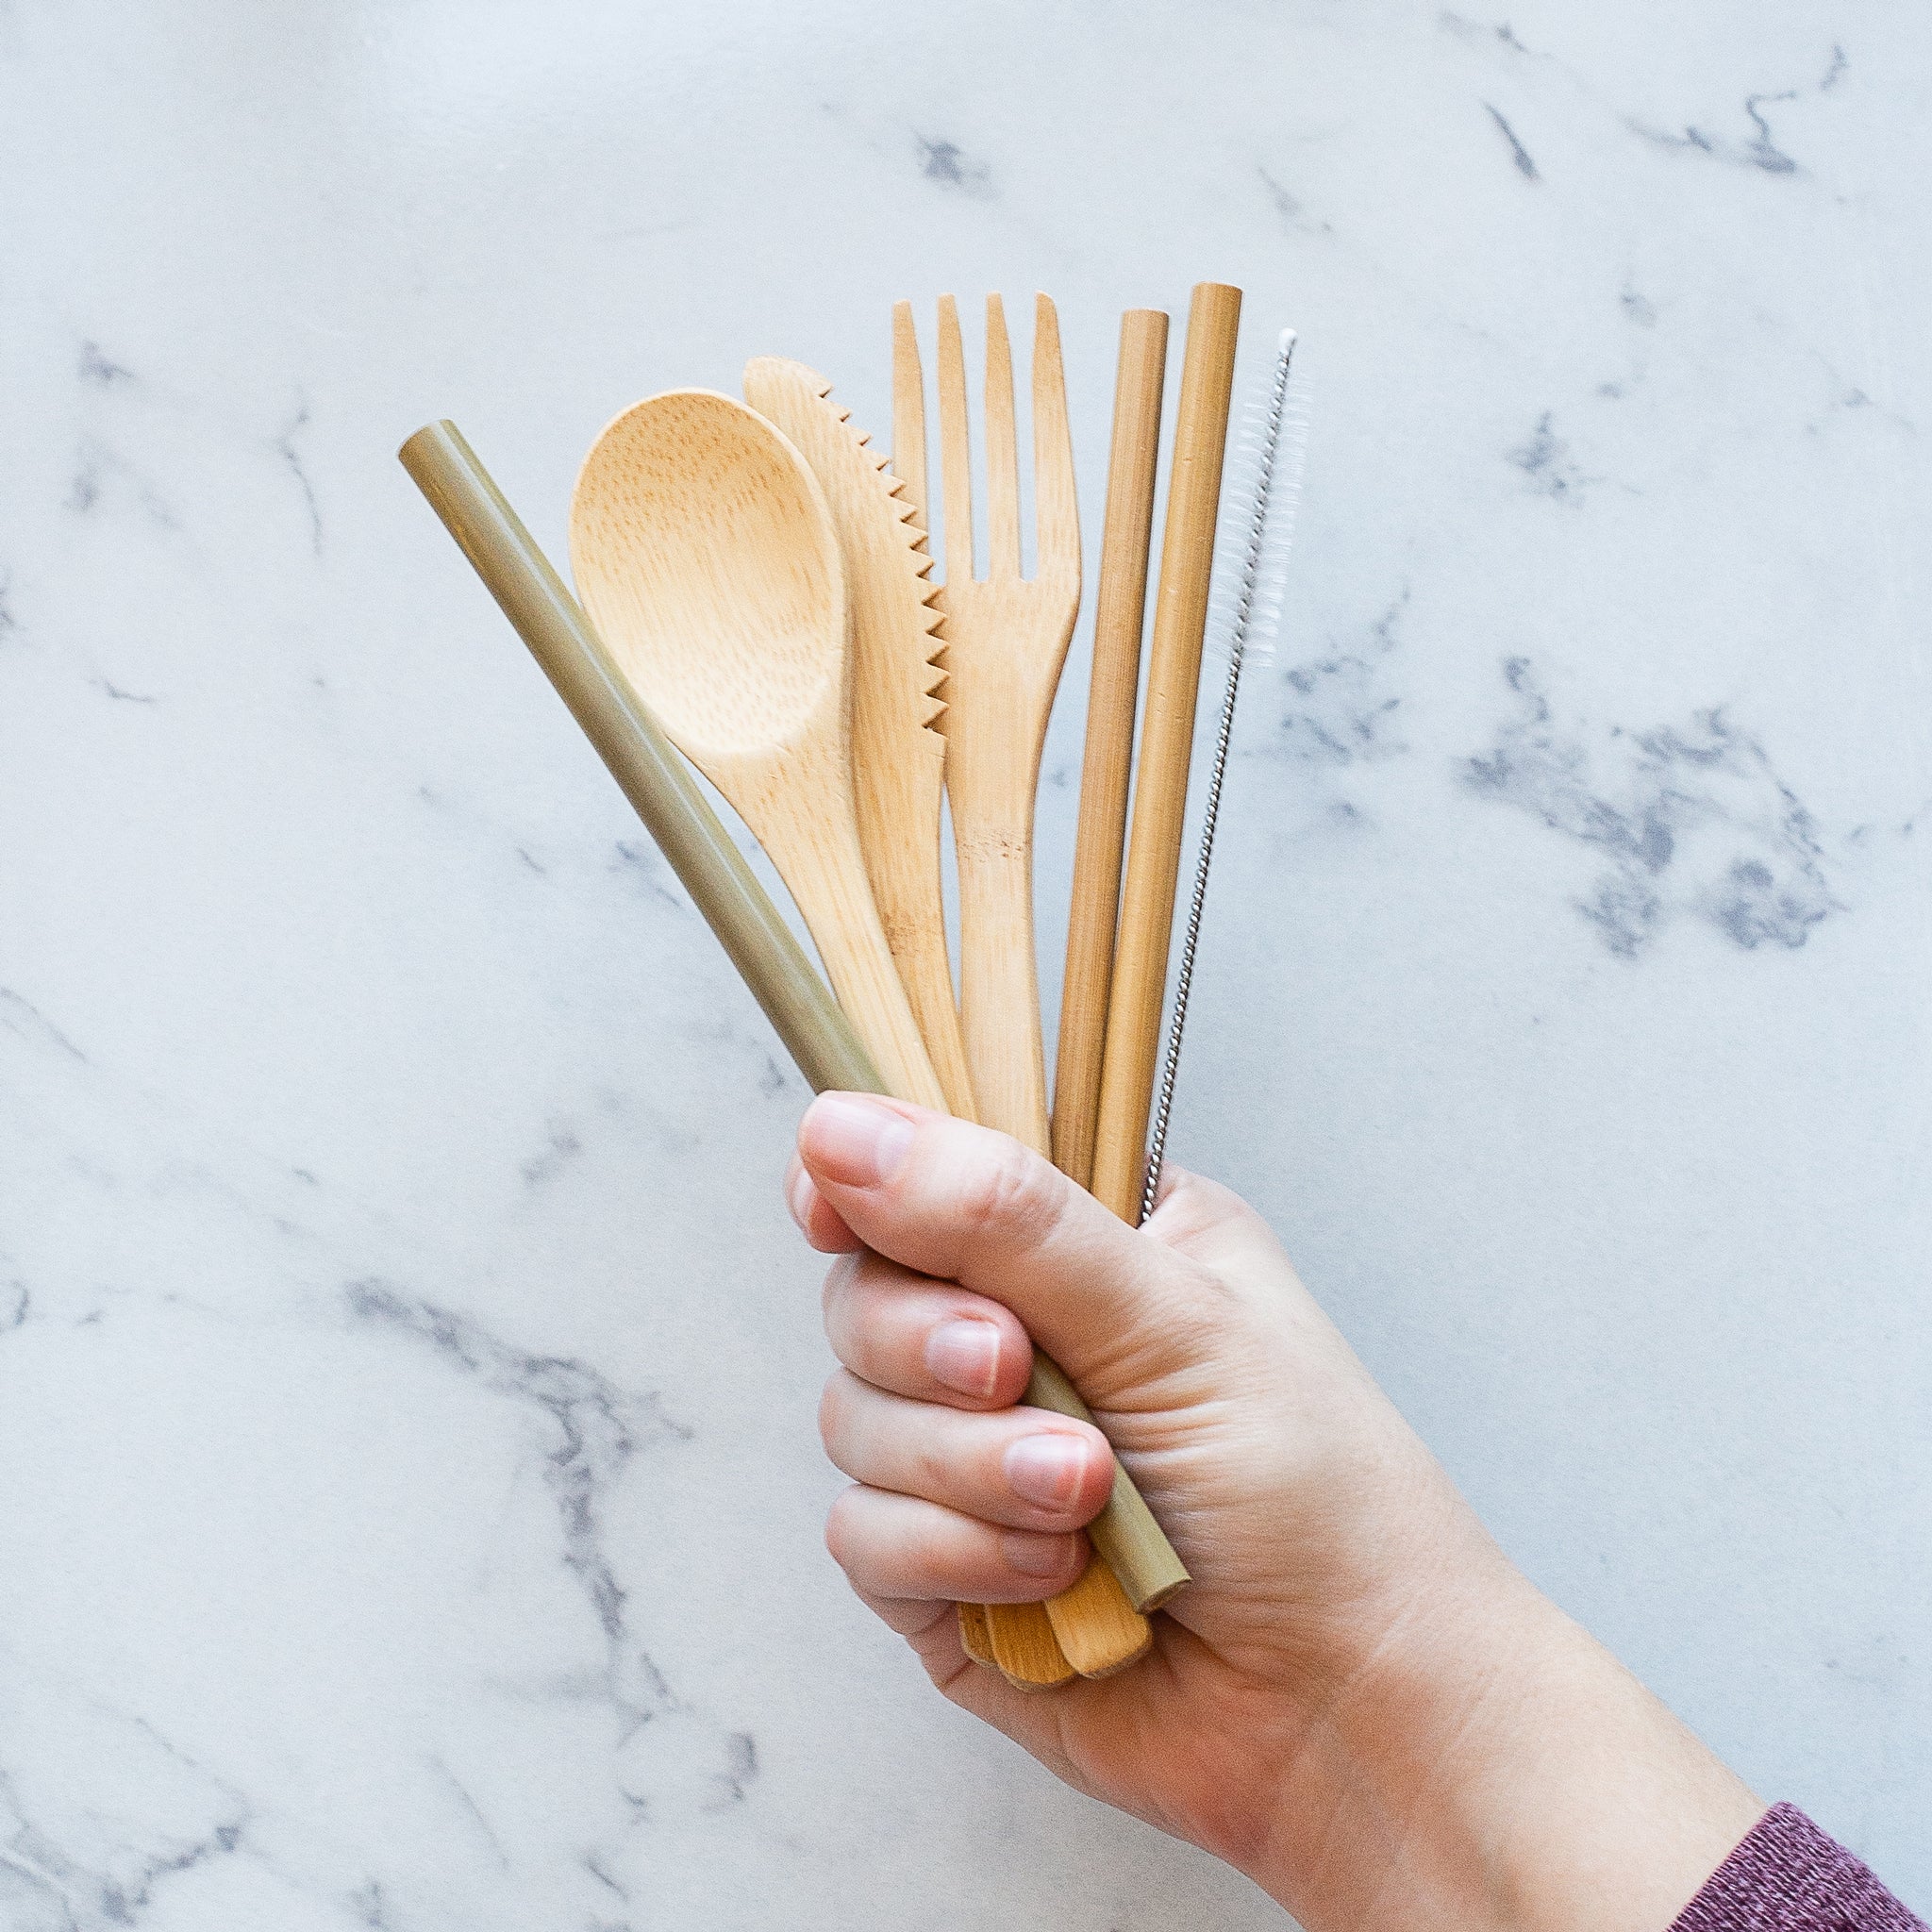 5 Piece Bamboo Kitchen/Cooking Utensils Set, Eco-Friendly Product,  Plastic-Free